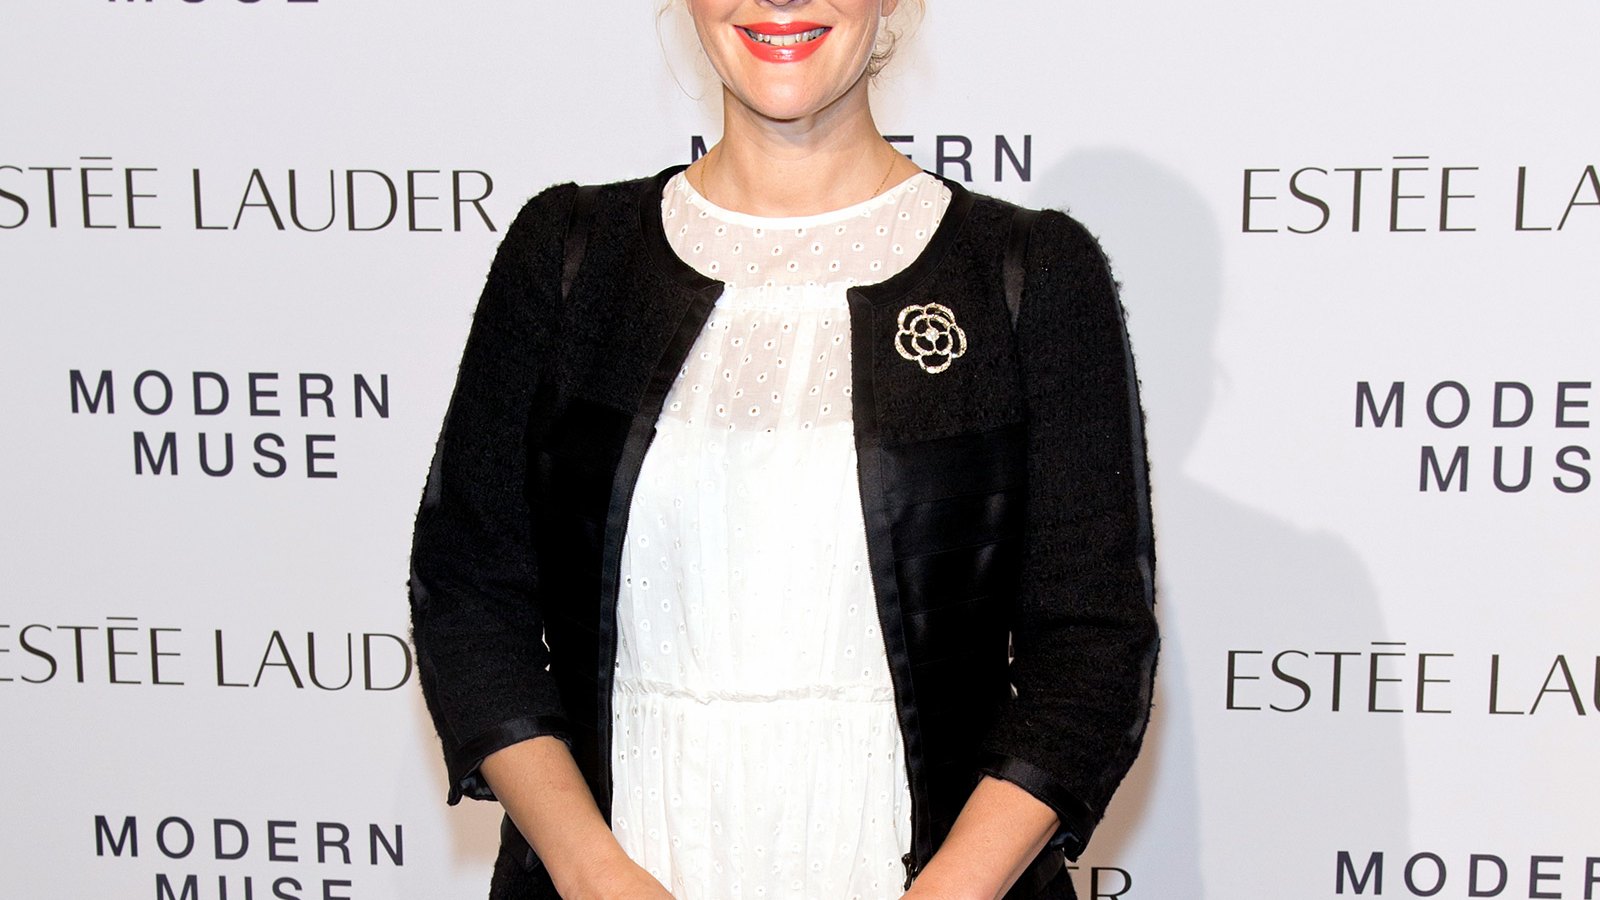 Drew Barrymore attends the Estee Lauder "Modern Muse" Fragrance Launch